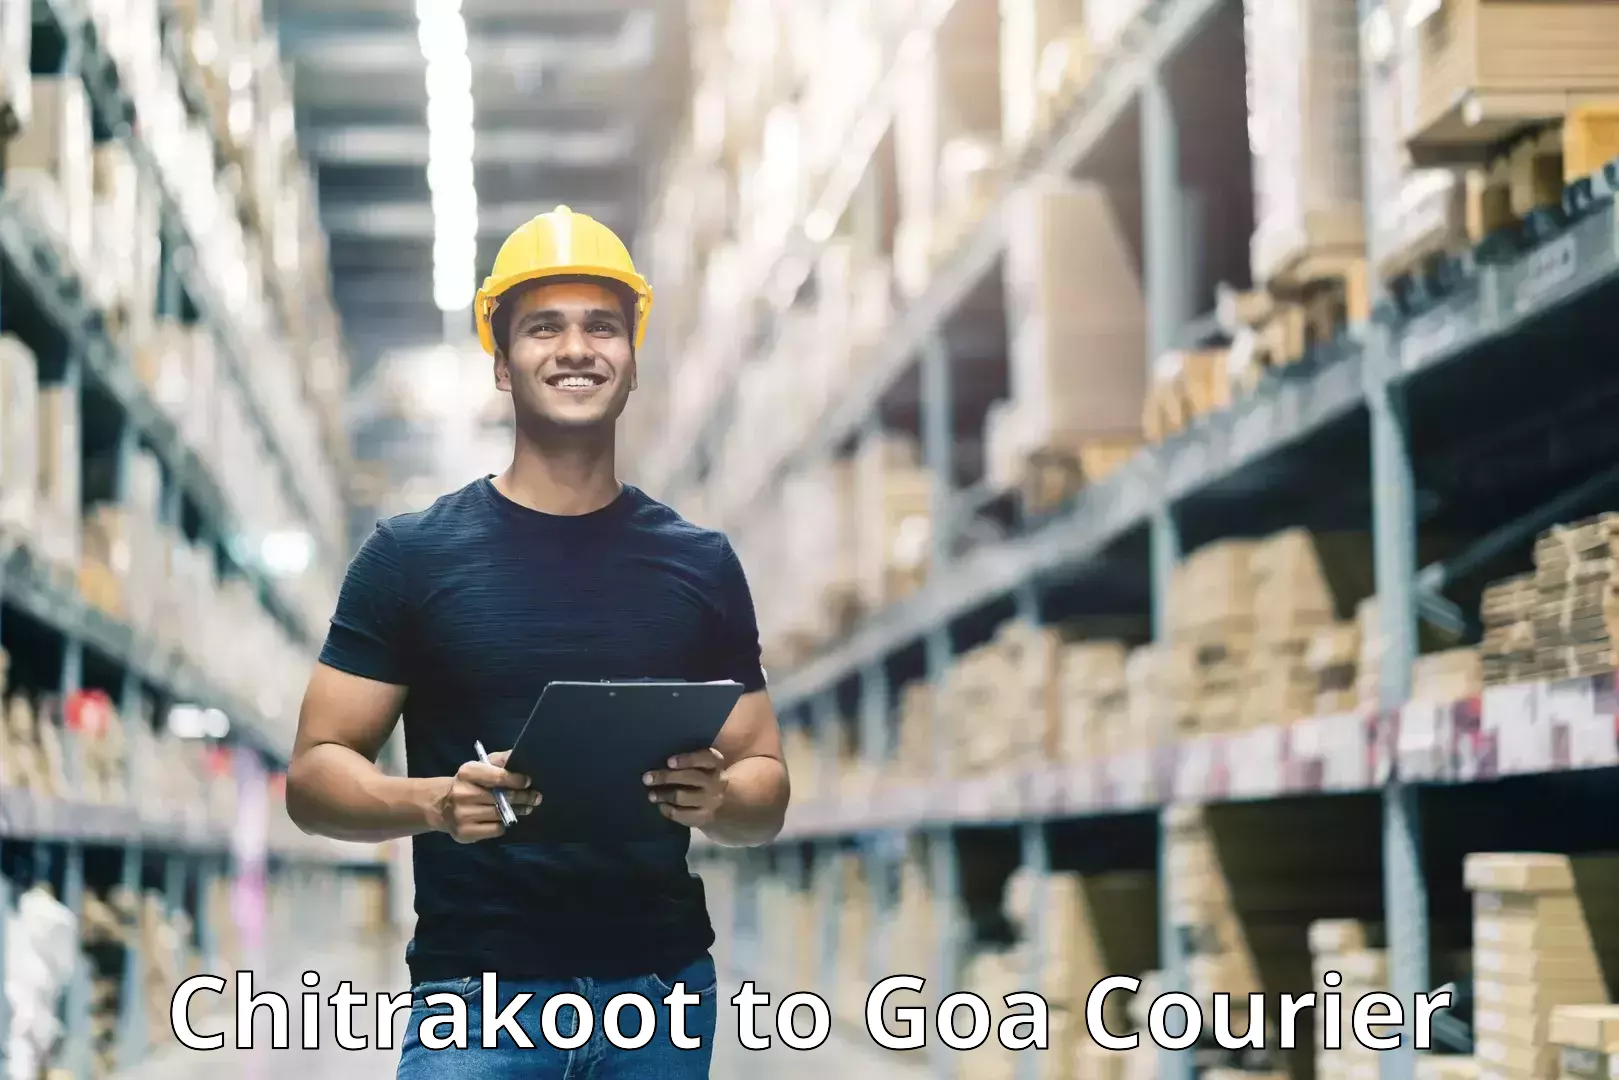 Customer-oriented courier services Chitrakoot to Mormugao Port